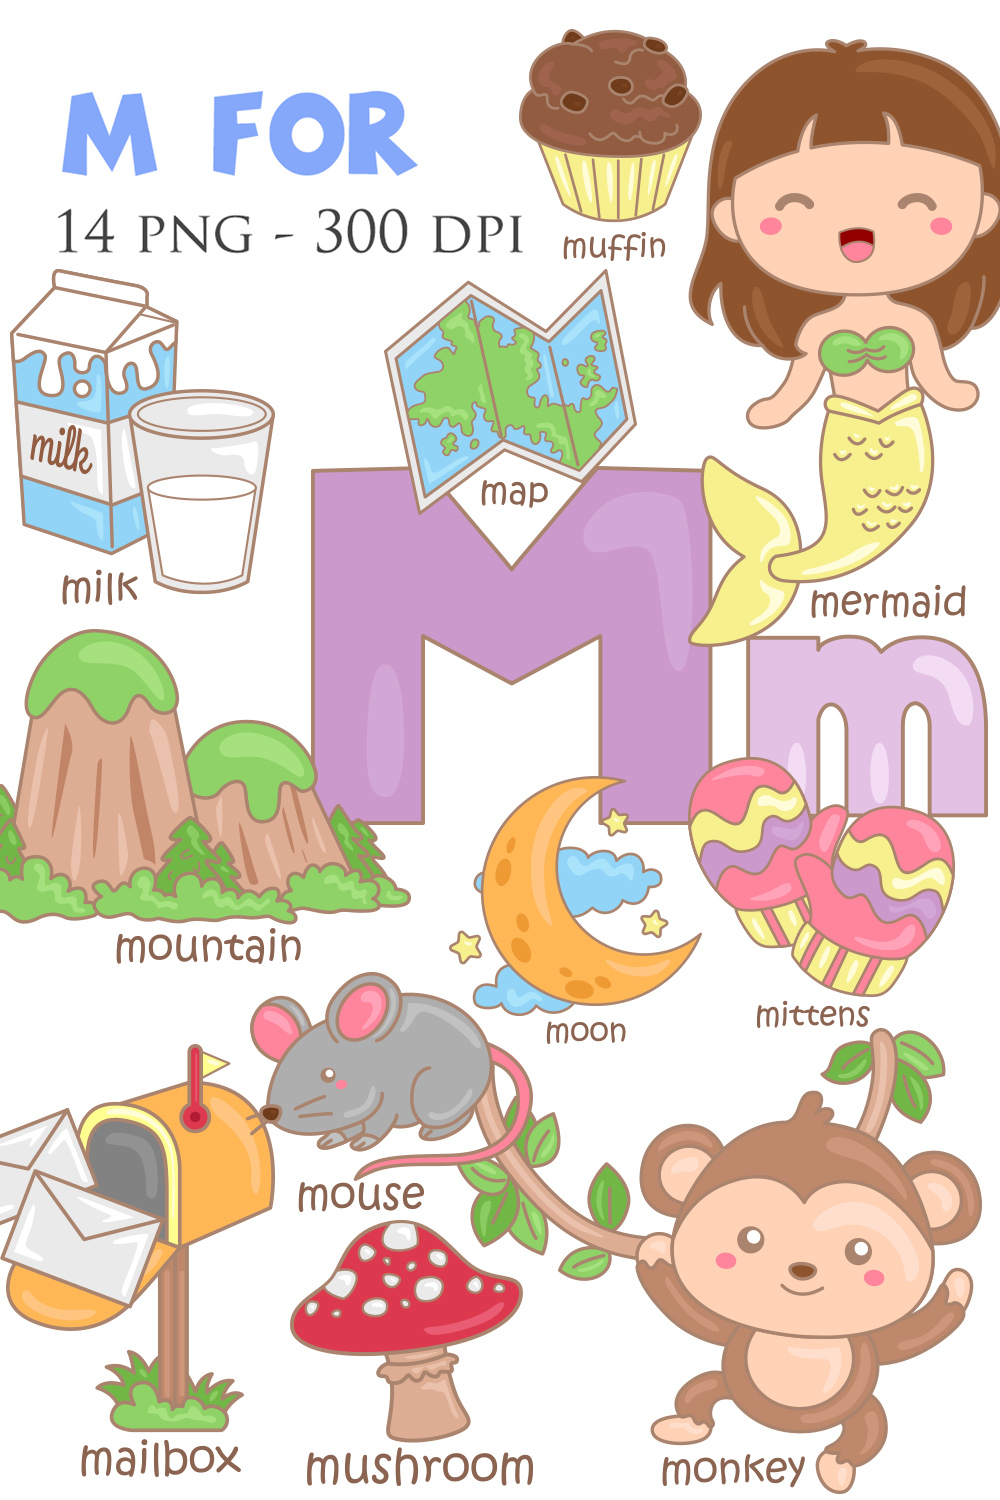 Alphabet M For Vocabulary School Letter Reading Writing Font Study Learning Student Toodler Kids Cartoon Mouse Monkey Mermaid Mountain Milk Mushroom Mittens Mailbox Moon Maracas Muffin Map Illustration Vector Clipart pinterest preview image.